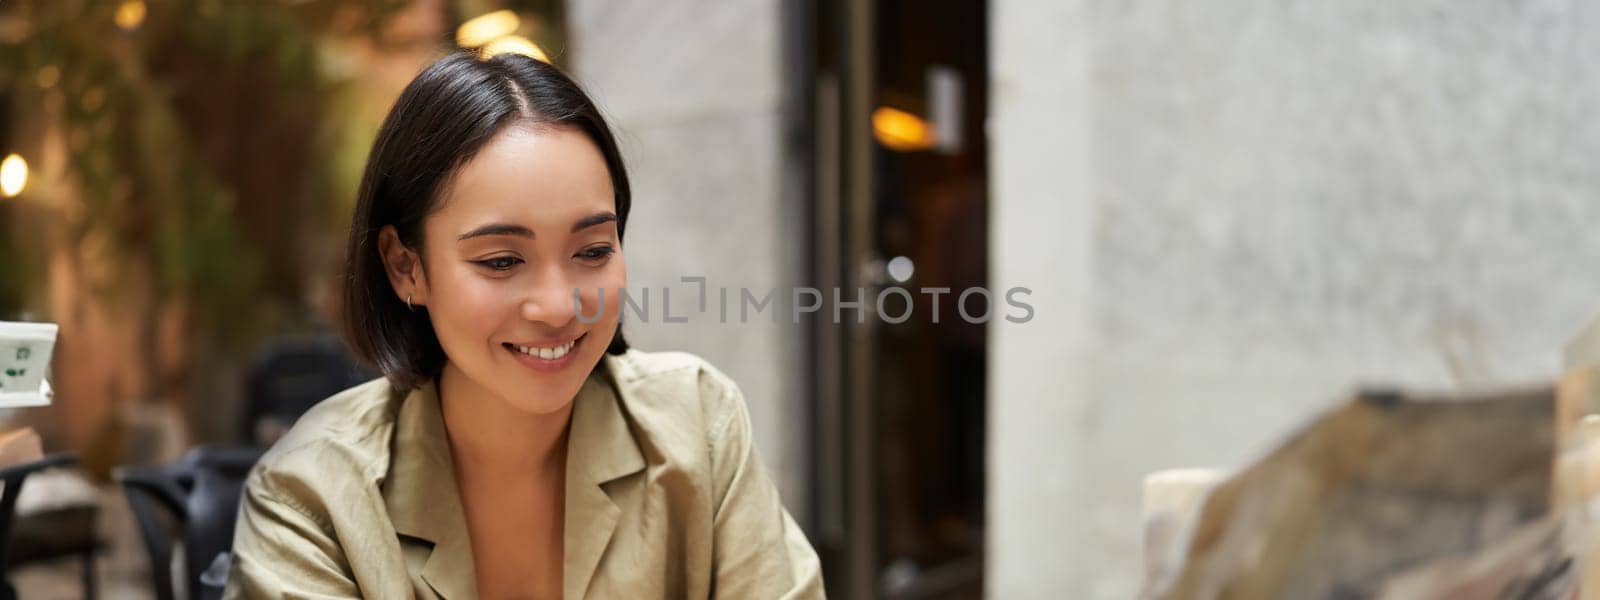 Vertical shot of young asian woman working on remote from outdoor cafe, sitting with laptop and smiling, studying.